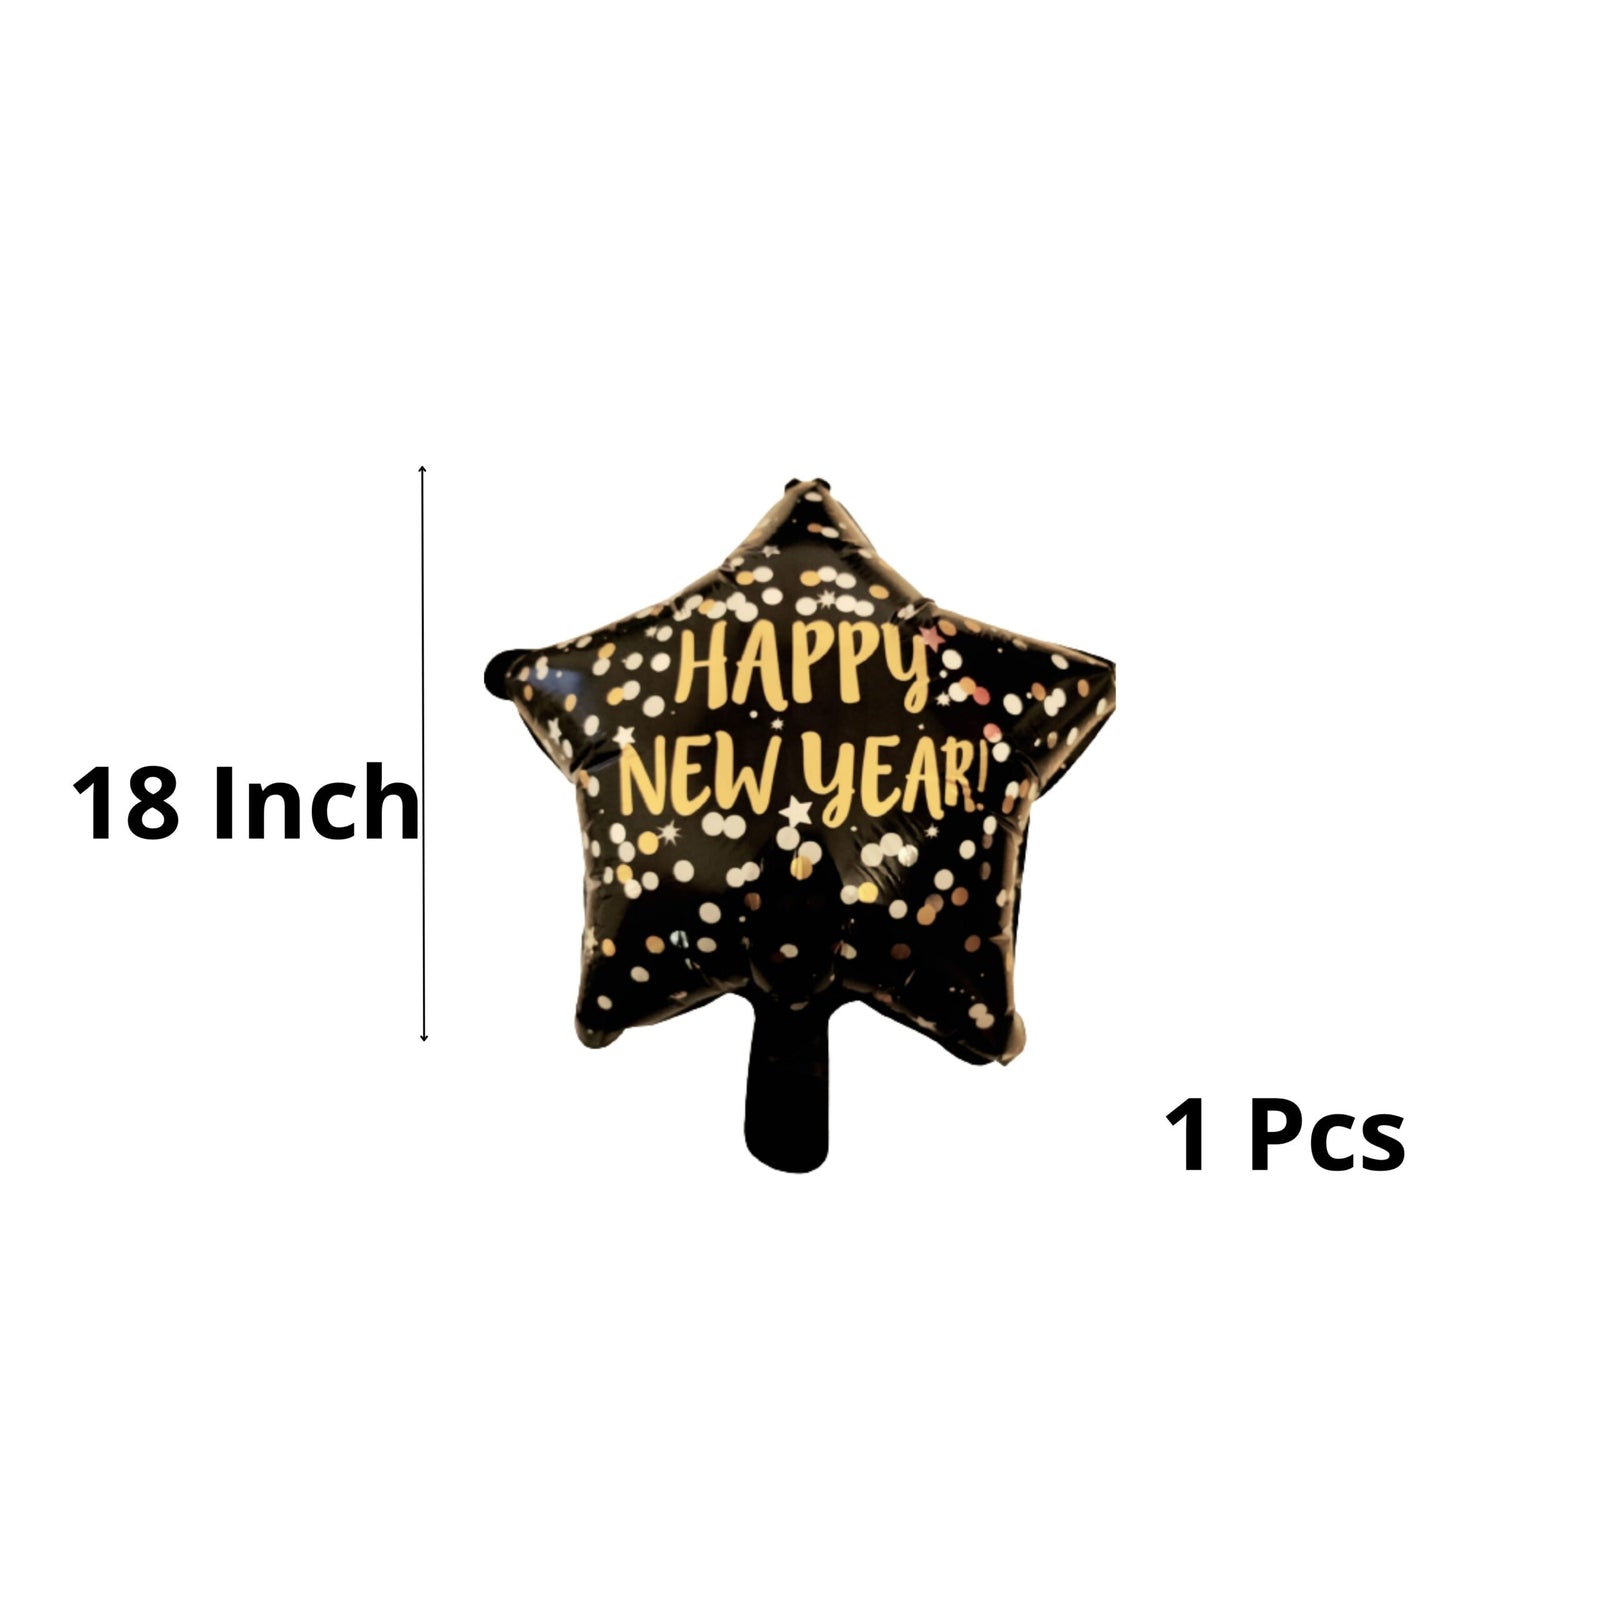 Welcome Happy New Year Foil Balloons for New Year Celebration Decoration (Champagne Bottle, Star Foil Balloons)